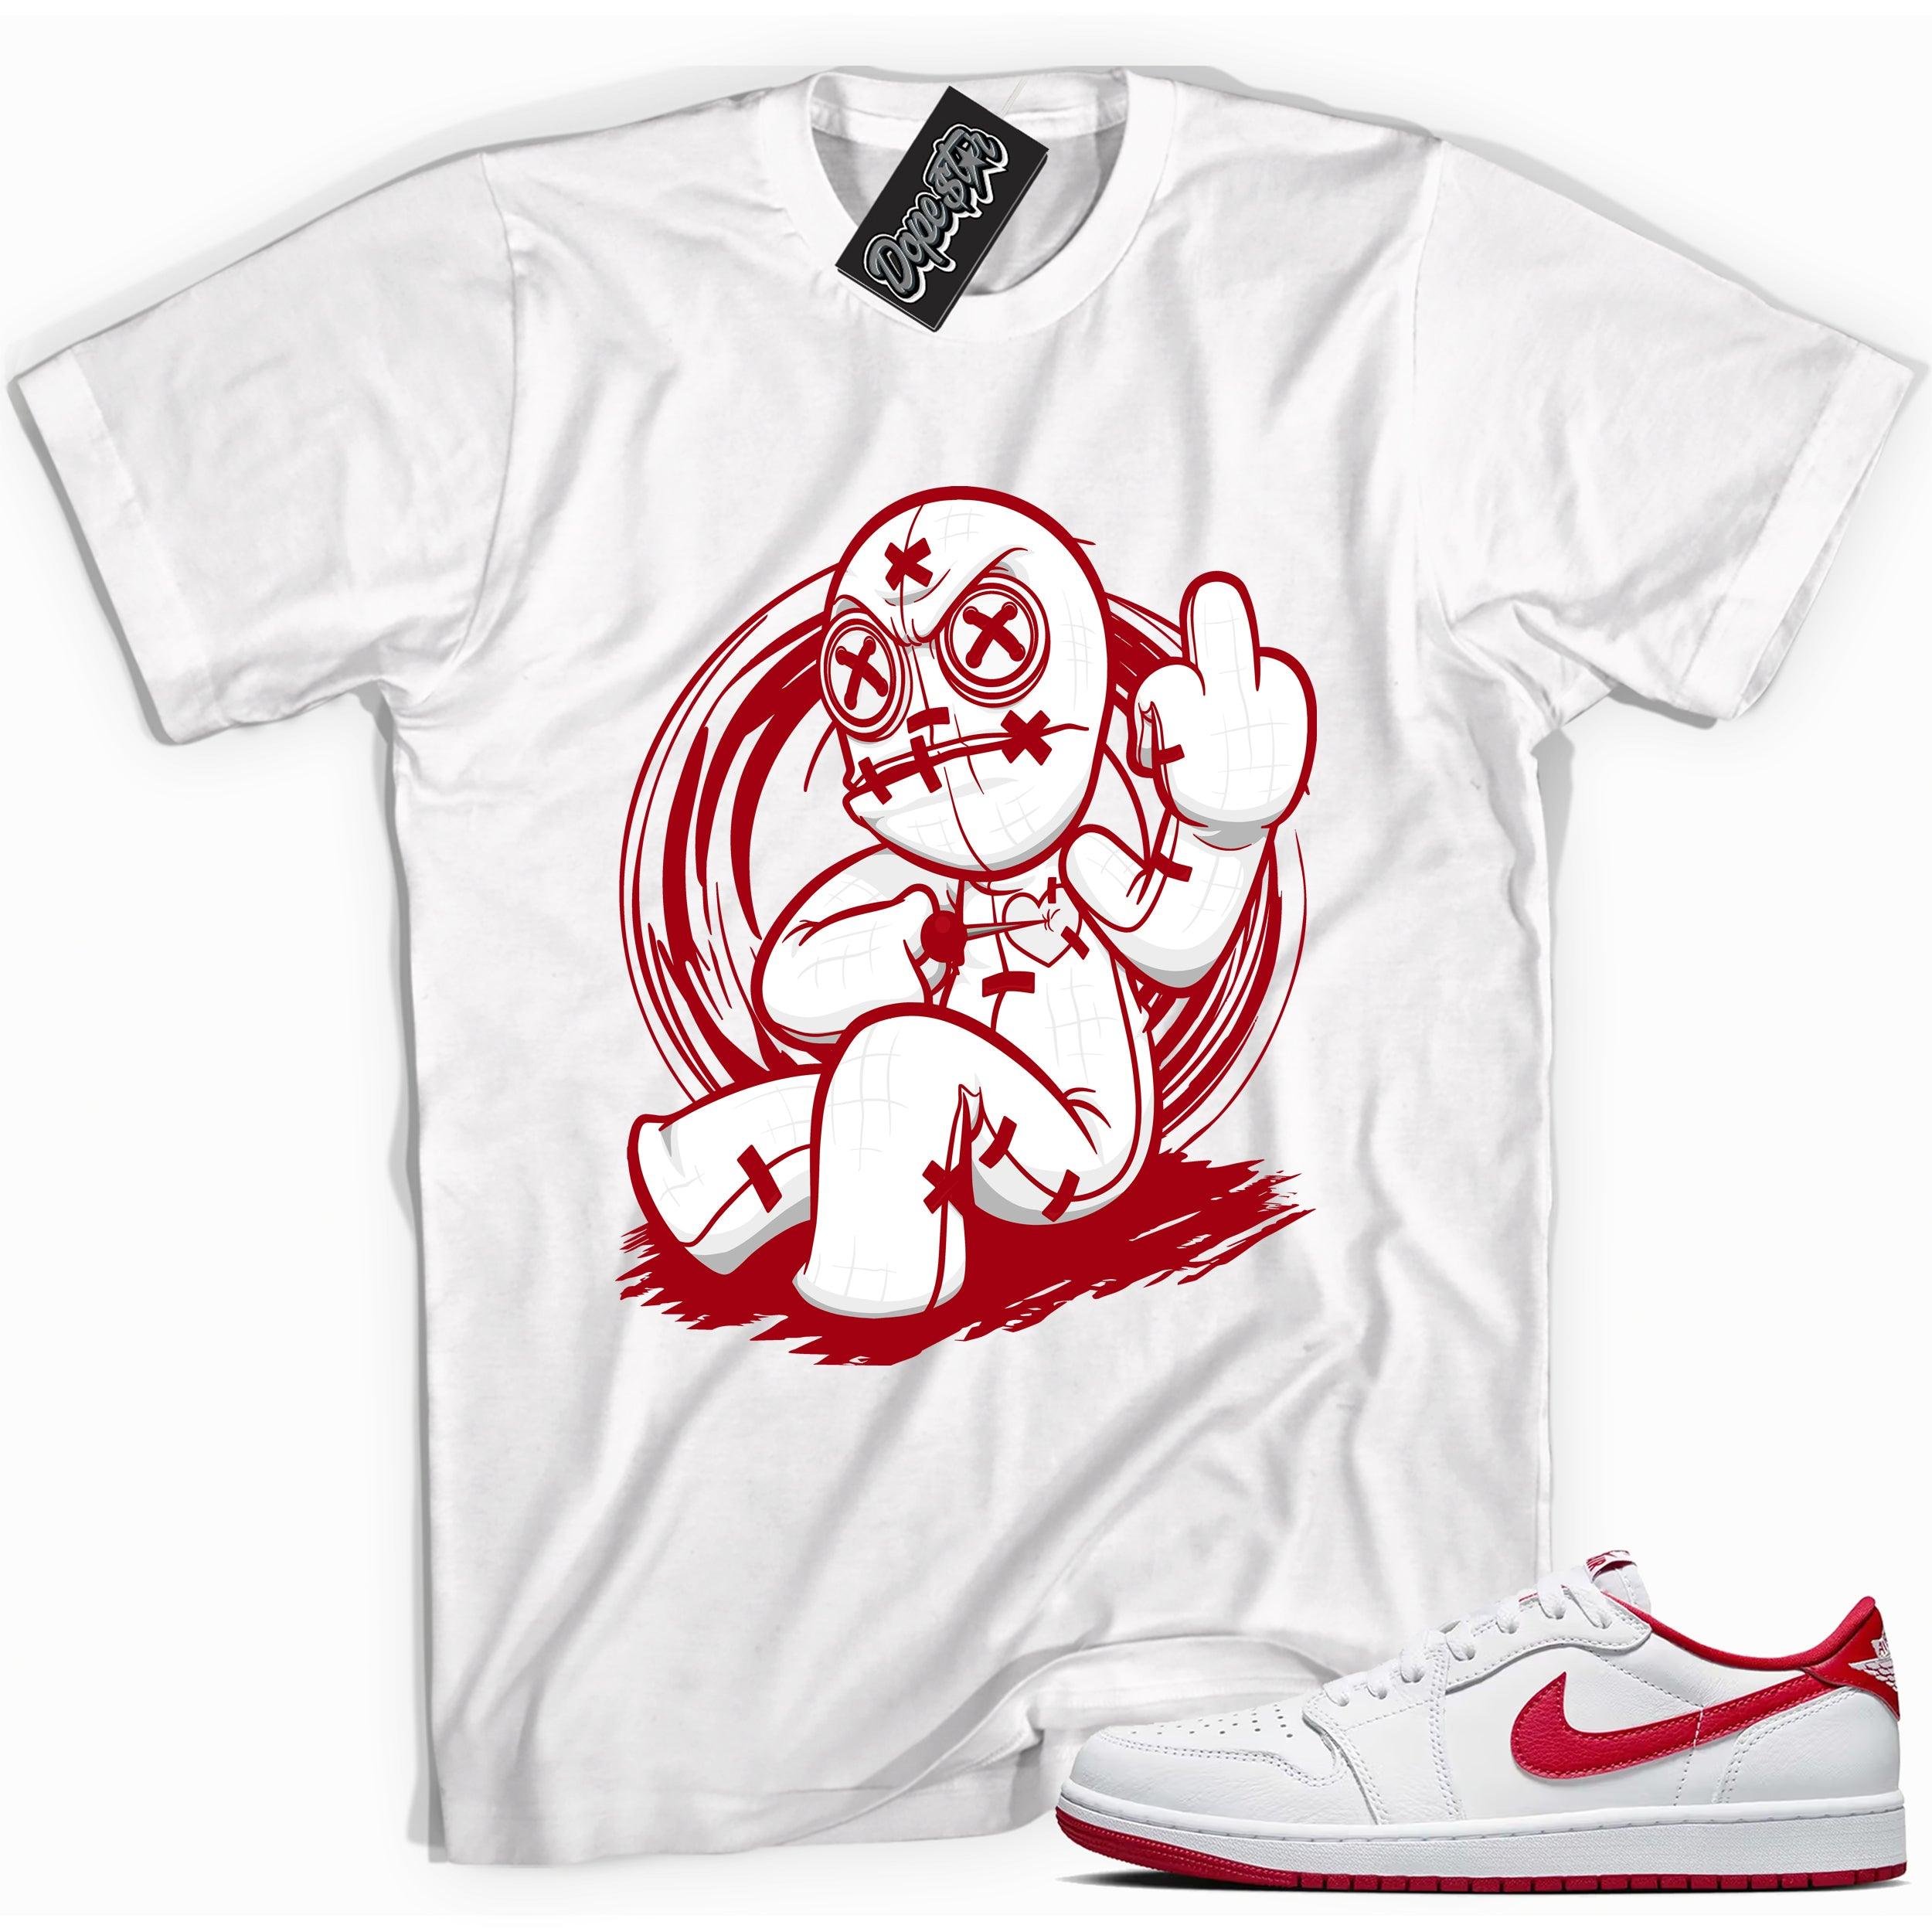 Cool White graphic tee with “ VooDoo Doll ” print, that perfectly matches Air Jordan 1 Retro Low OG University Red and white sneakers